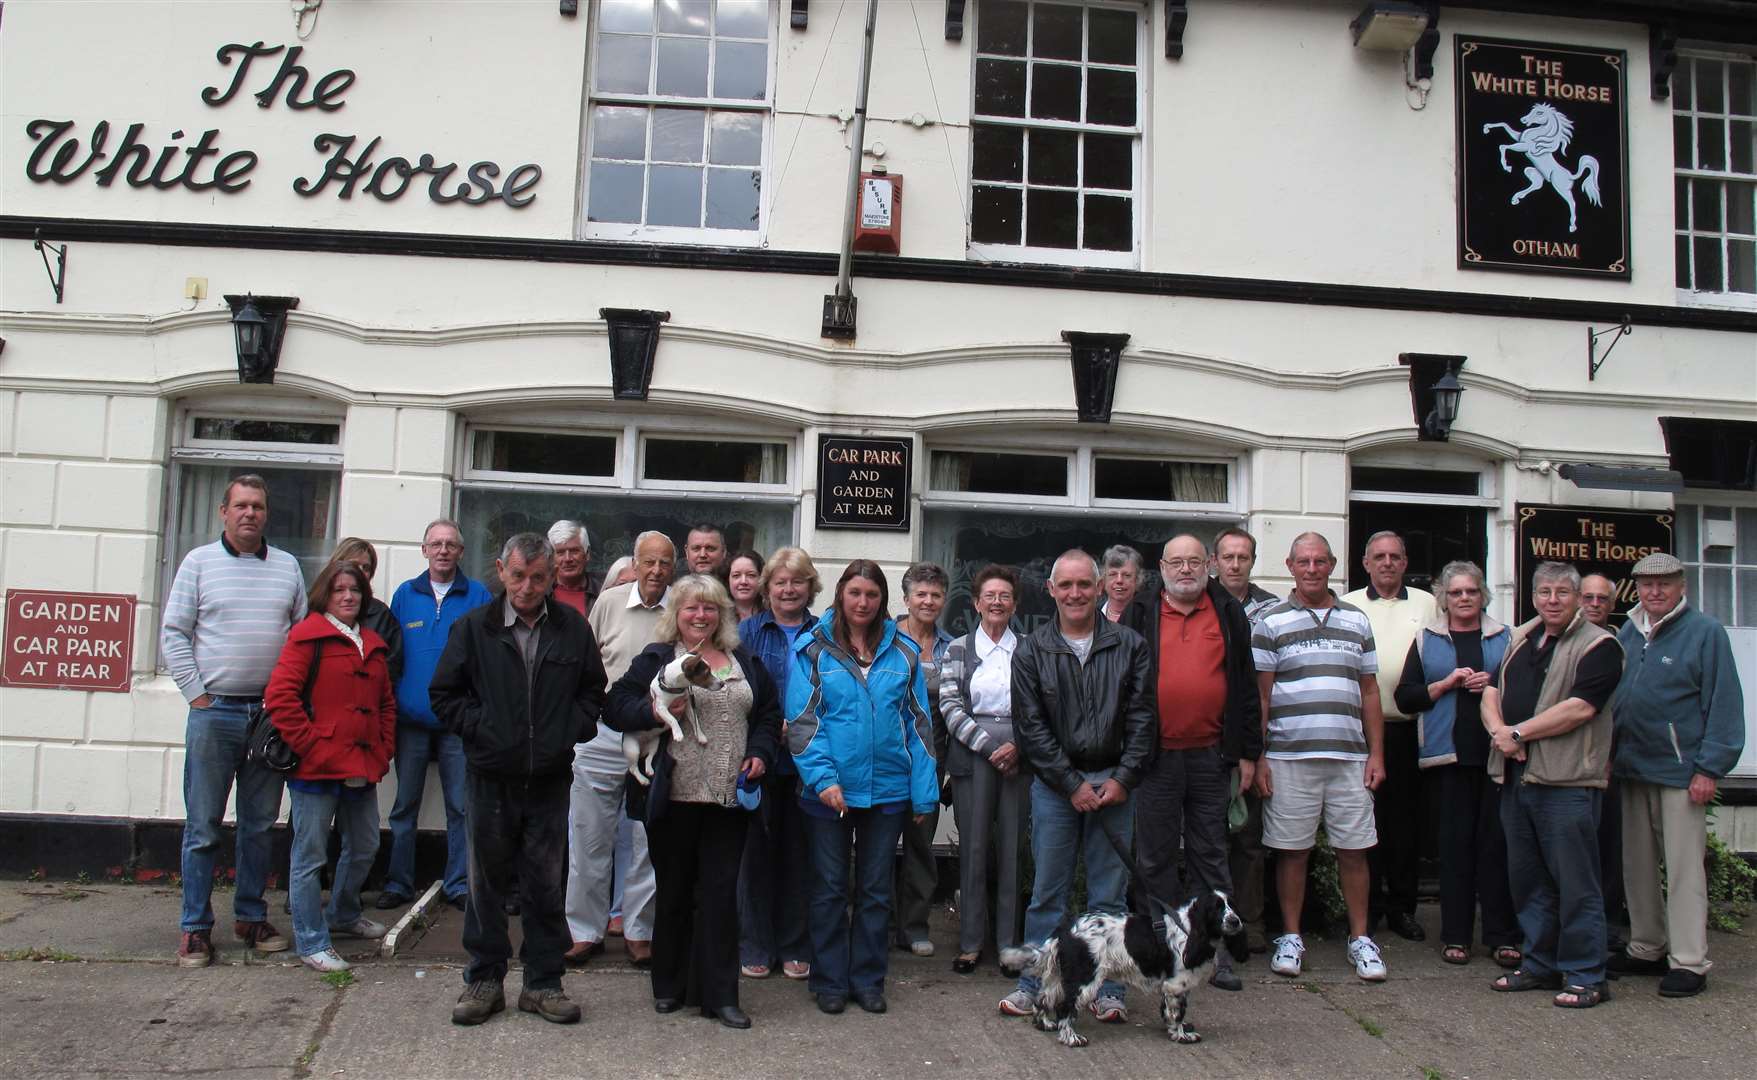 Villagers who raised £235,000 in less than a month to buy The White Horse Pub in Otham